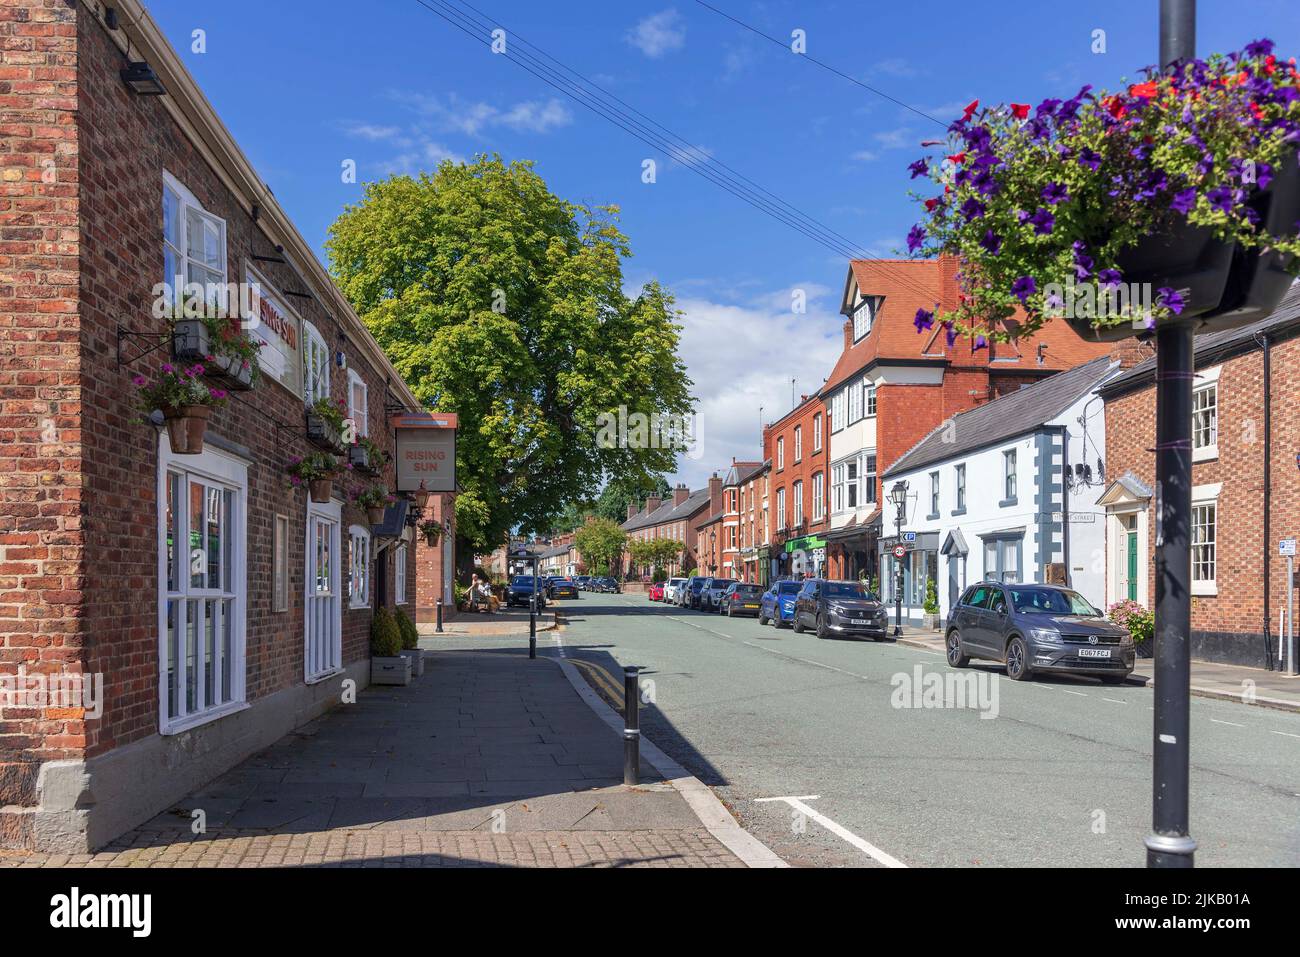 The High stret in Tarporle, Cheshire with the Rising Sun pub on the left. Stock Photo